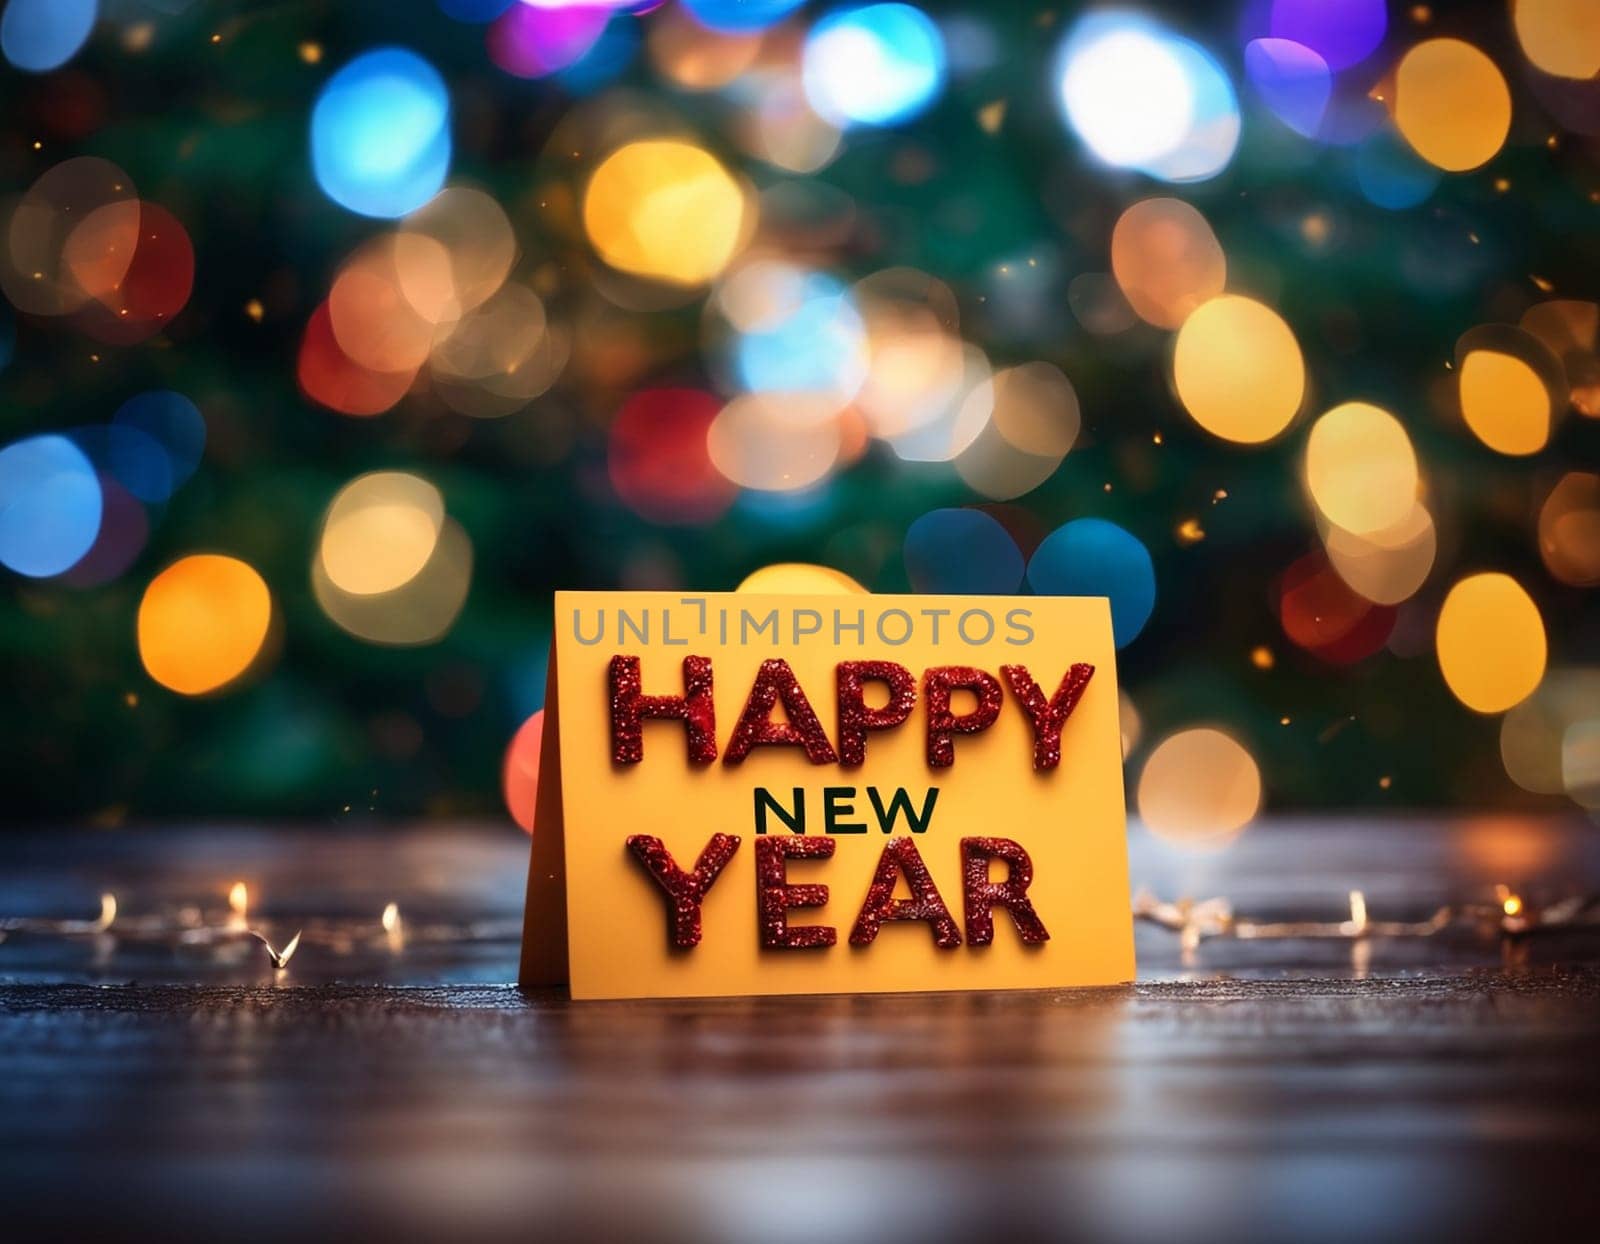 Beautiful New Year background by NeuroSky